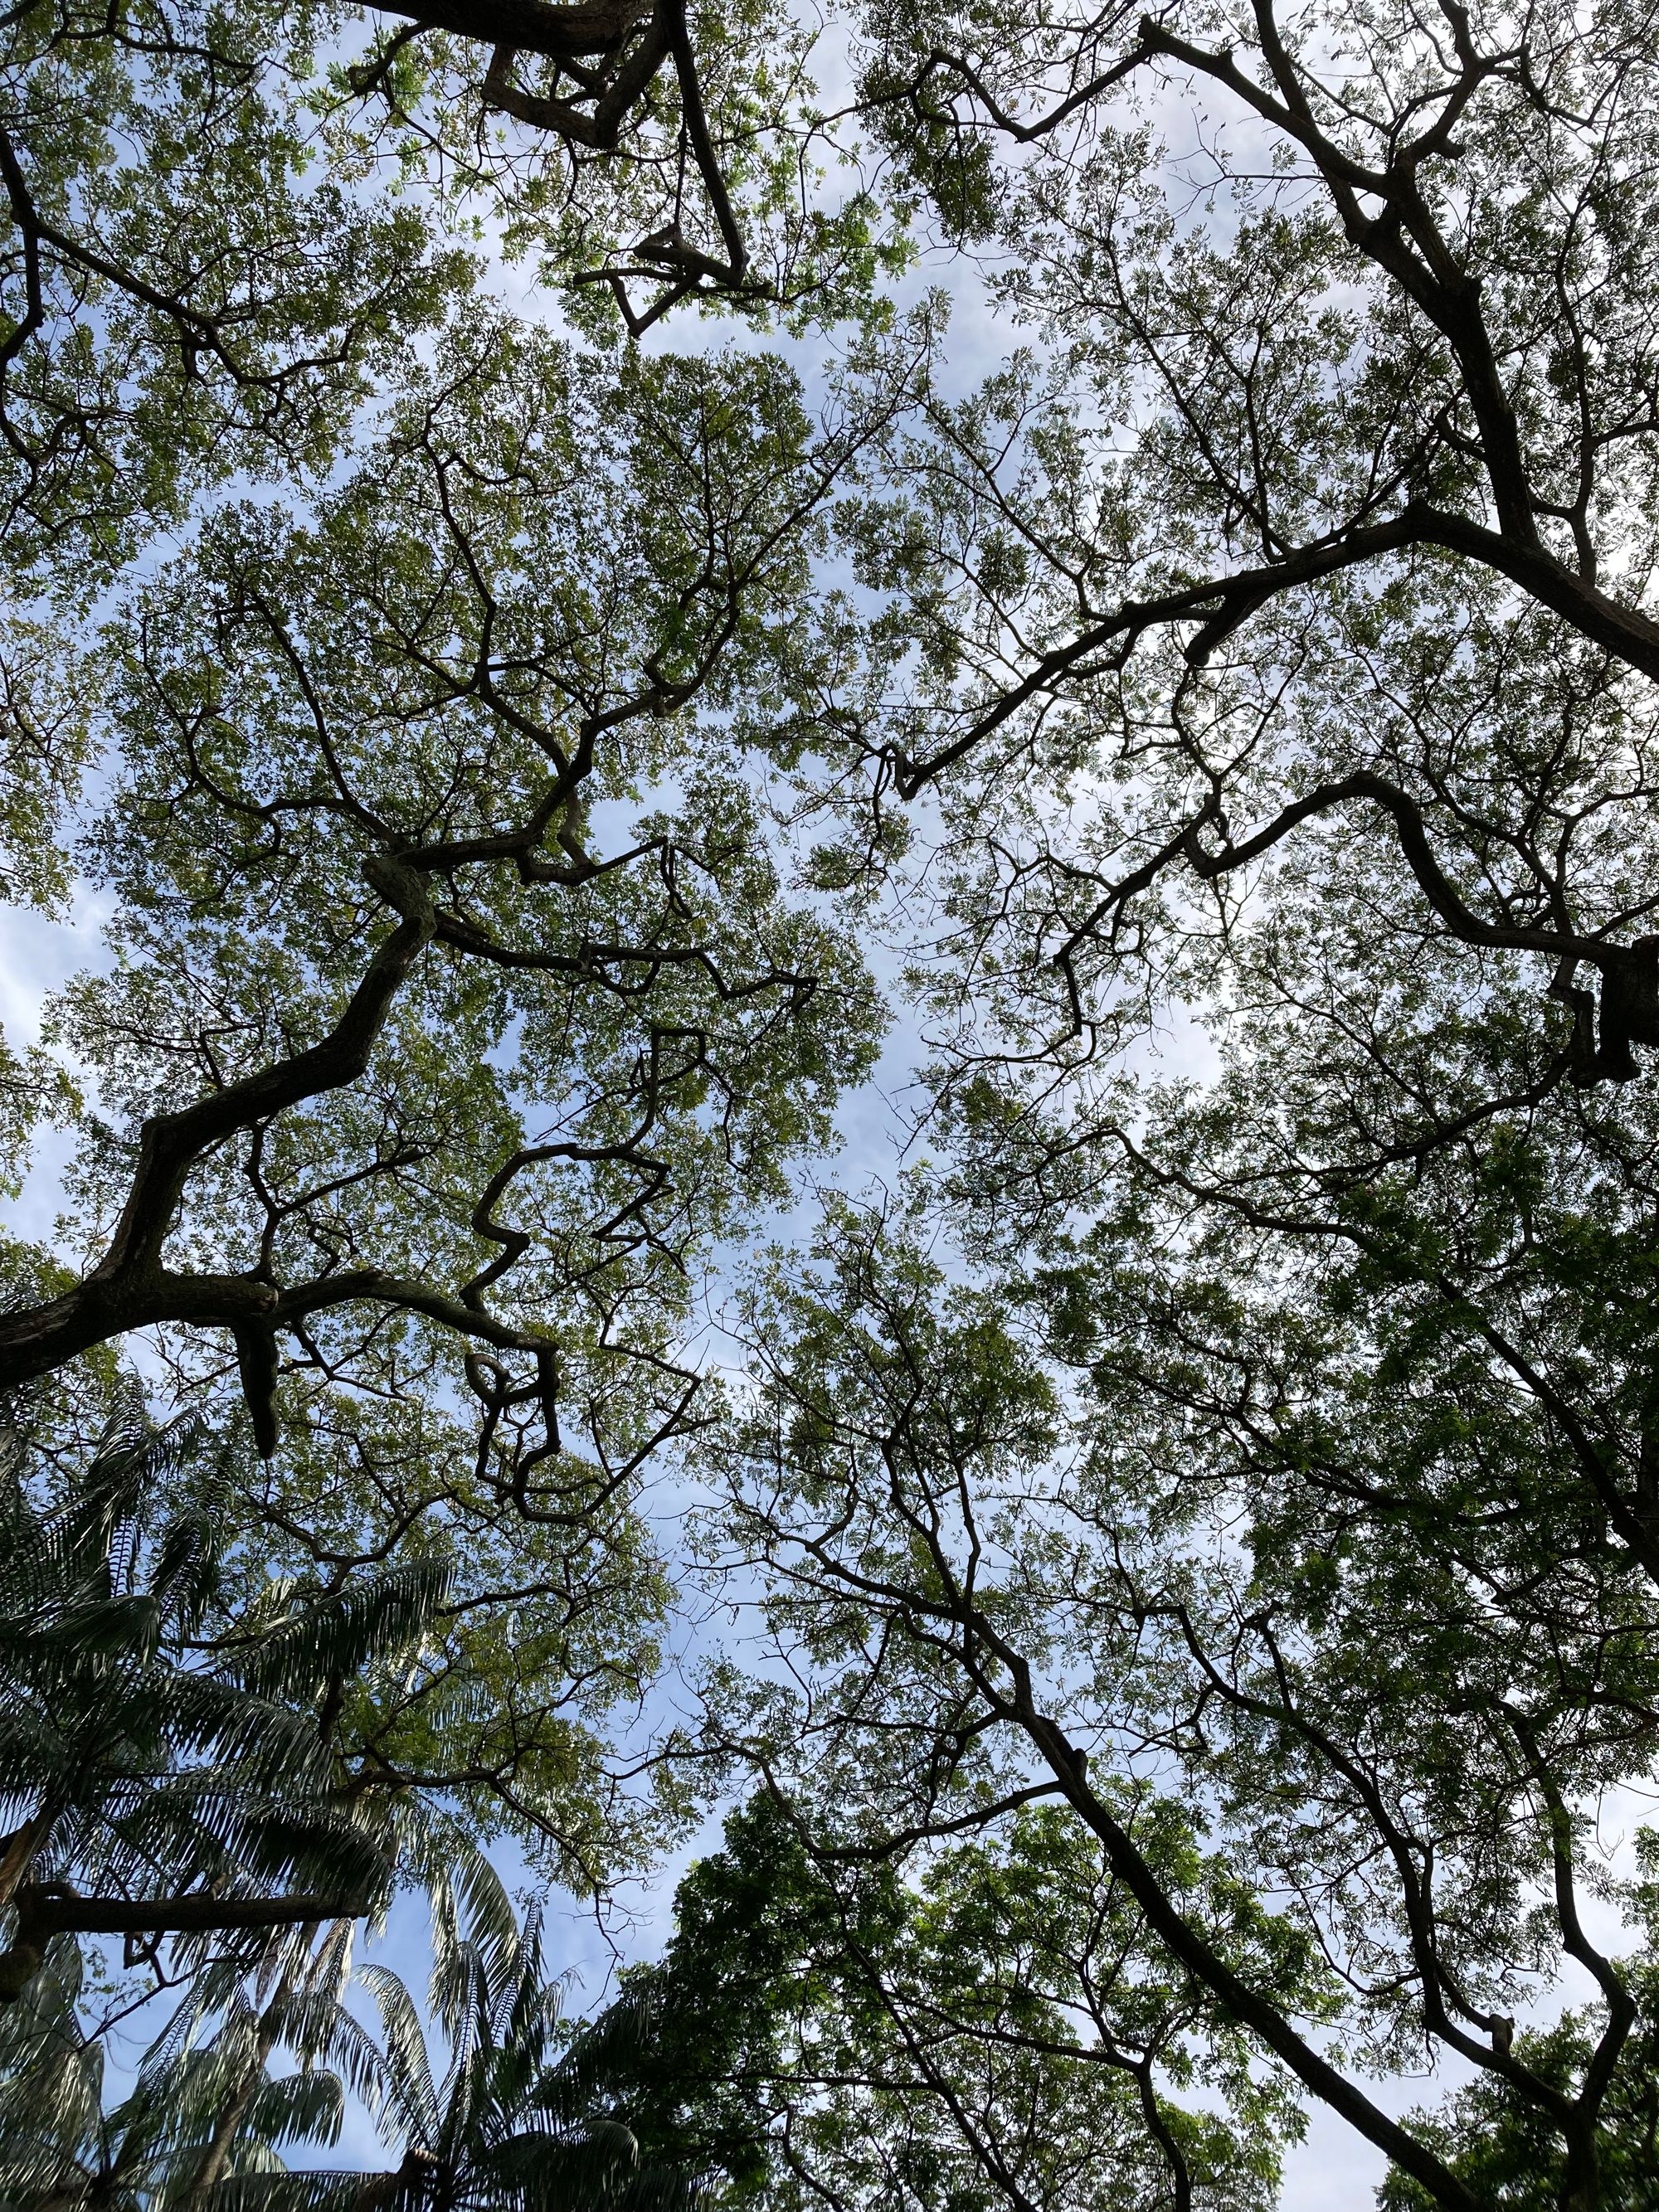 Looking upwards, a narrow gap is visible between the crowns of neighbouring rain trees.